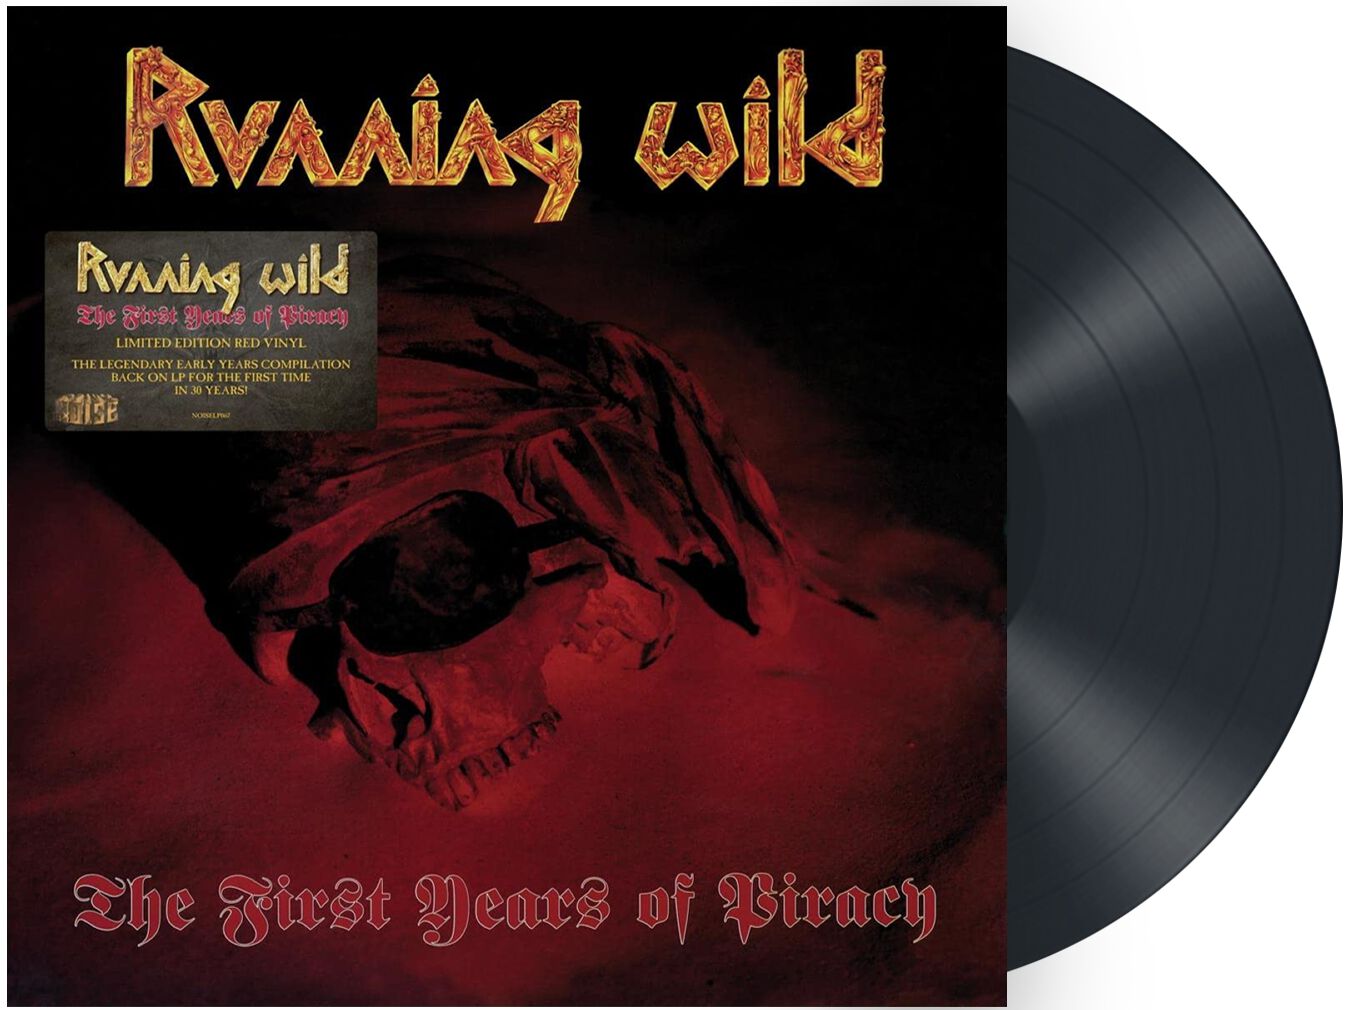 Running Wild The first years of piracy LP red